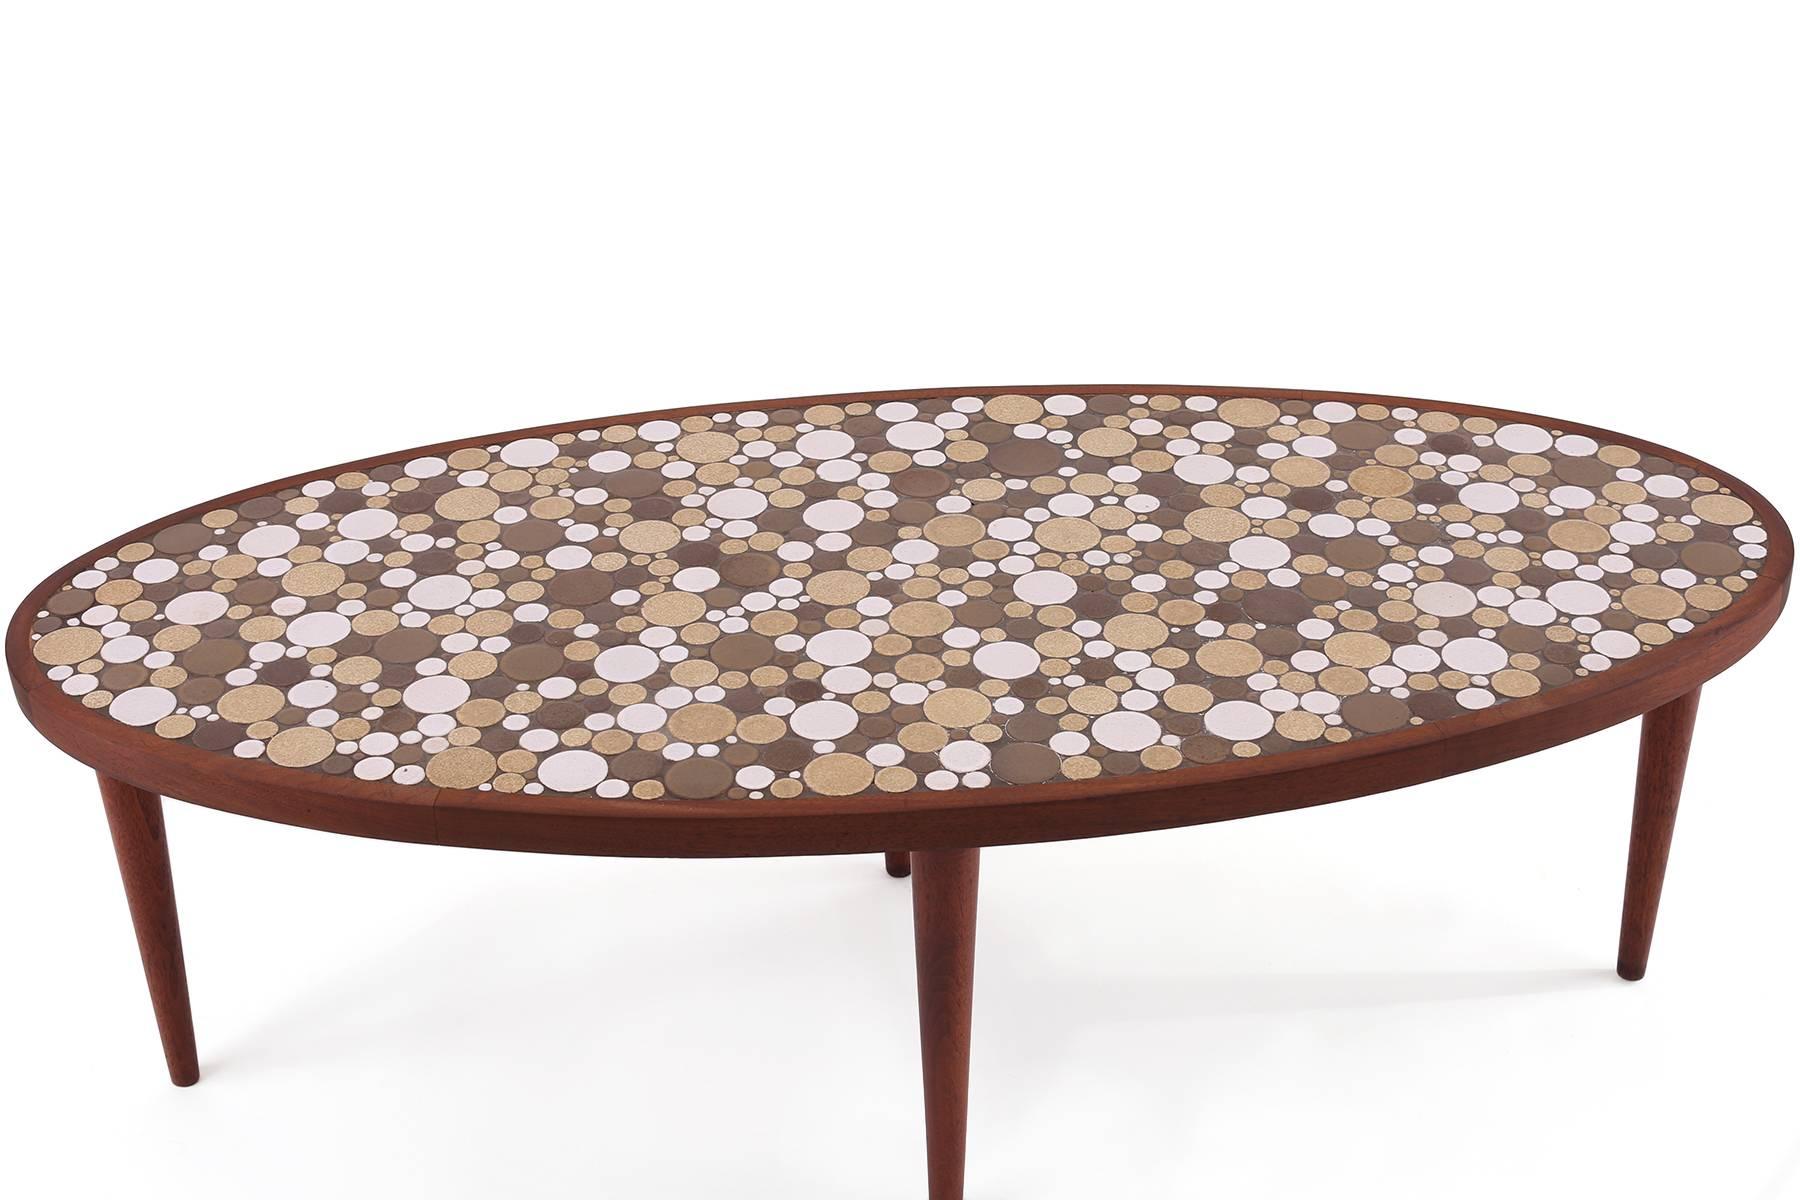 Rare mosaic cocktail table by Jane and Gordon Martz circa late 1950s. This seldom seen example has beautiful inlaid circular tiles with solid walnut legs and trim.
   